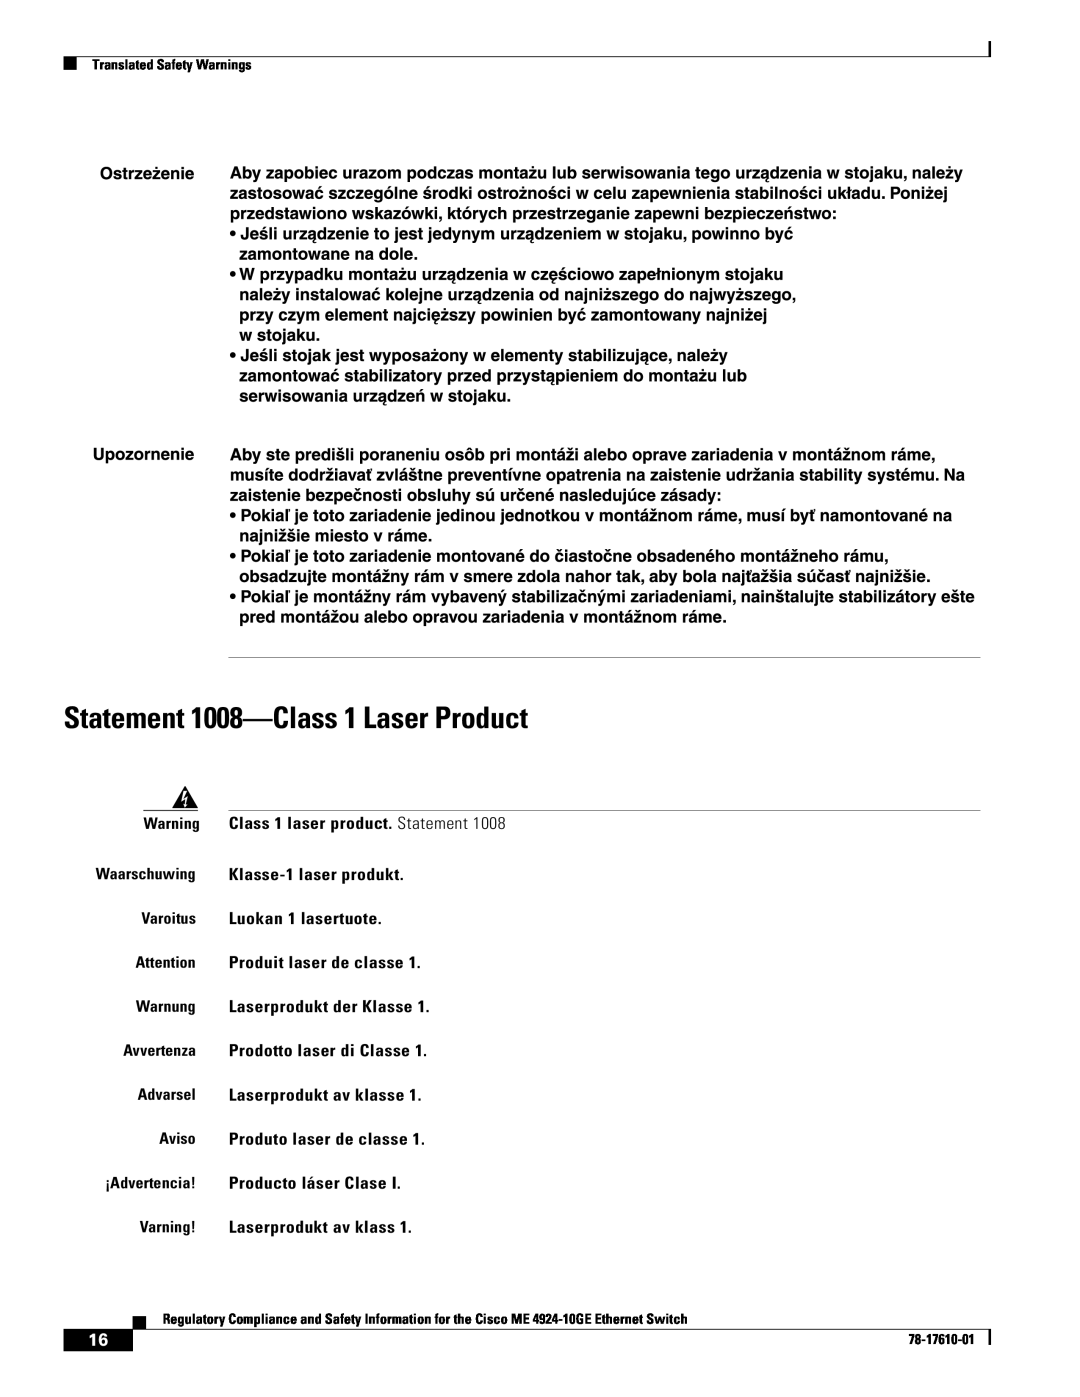 Cisco Systems ME 4924-10GE important safety instructions Statement 1008-Class 1 Laser Product 